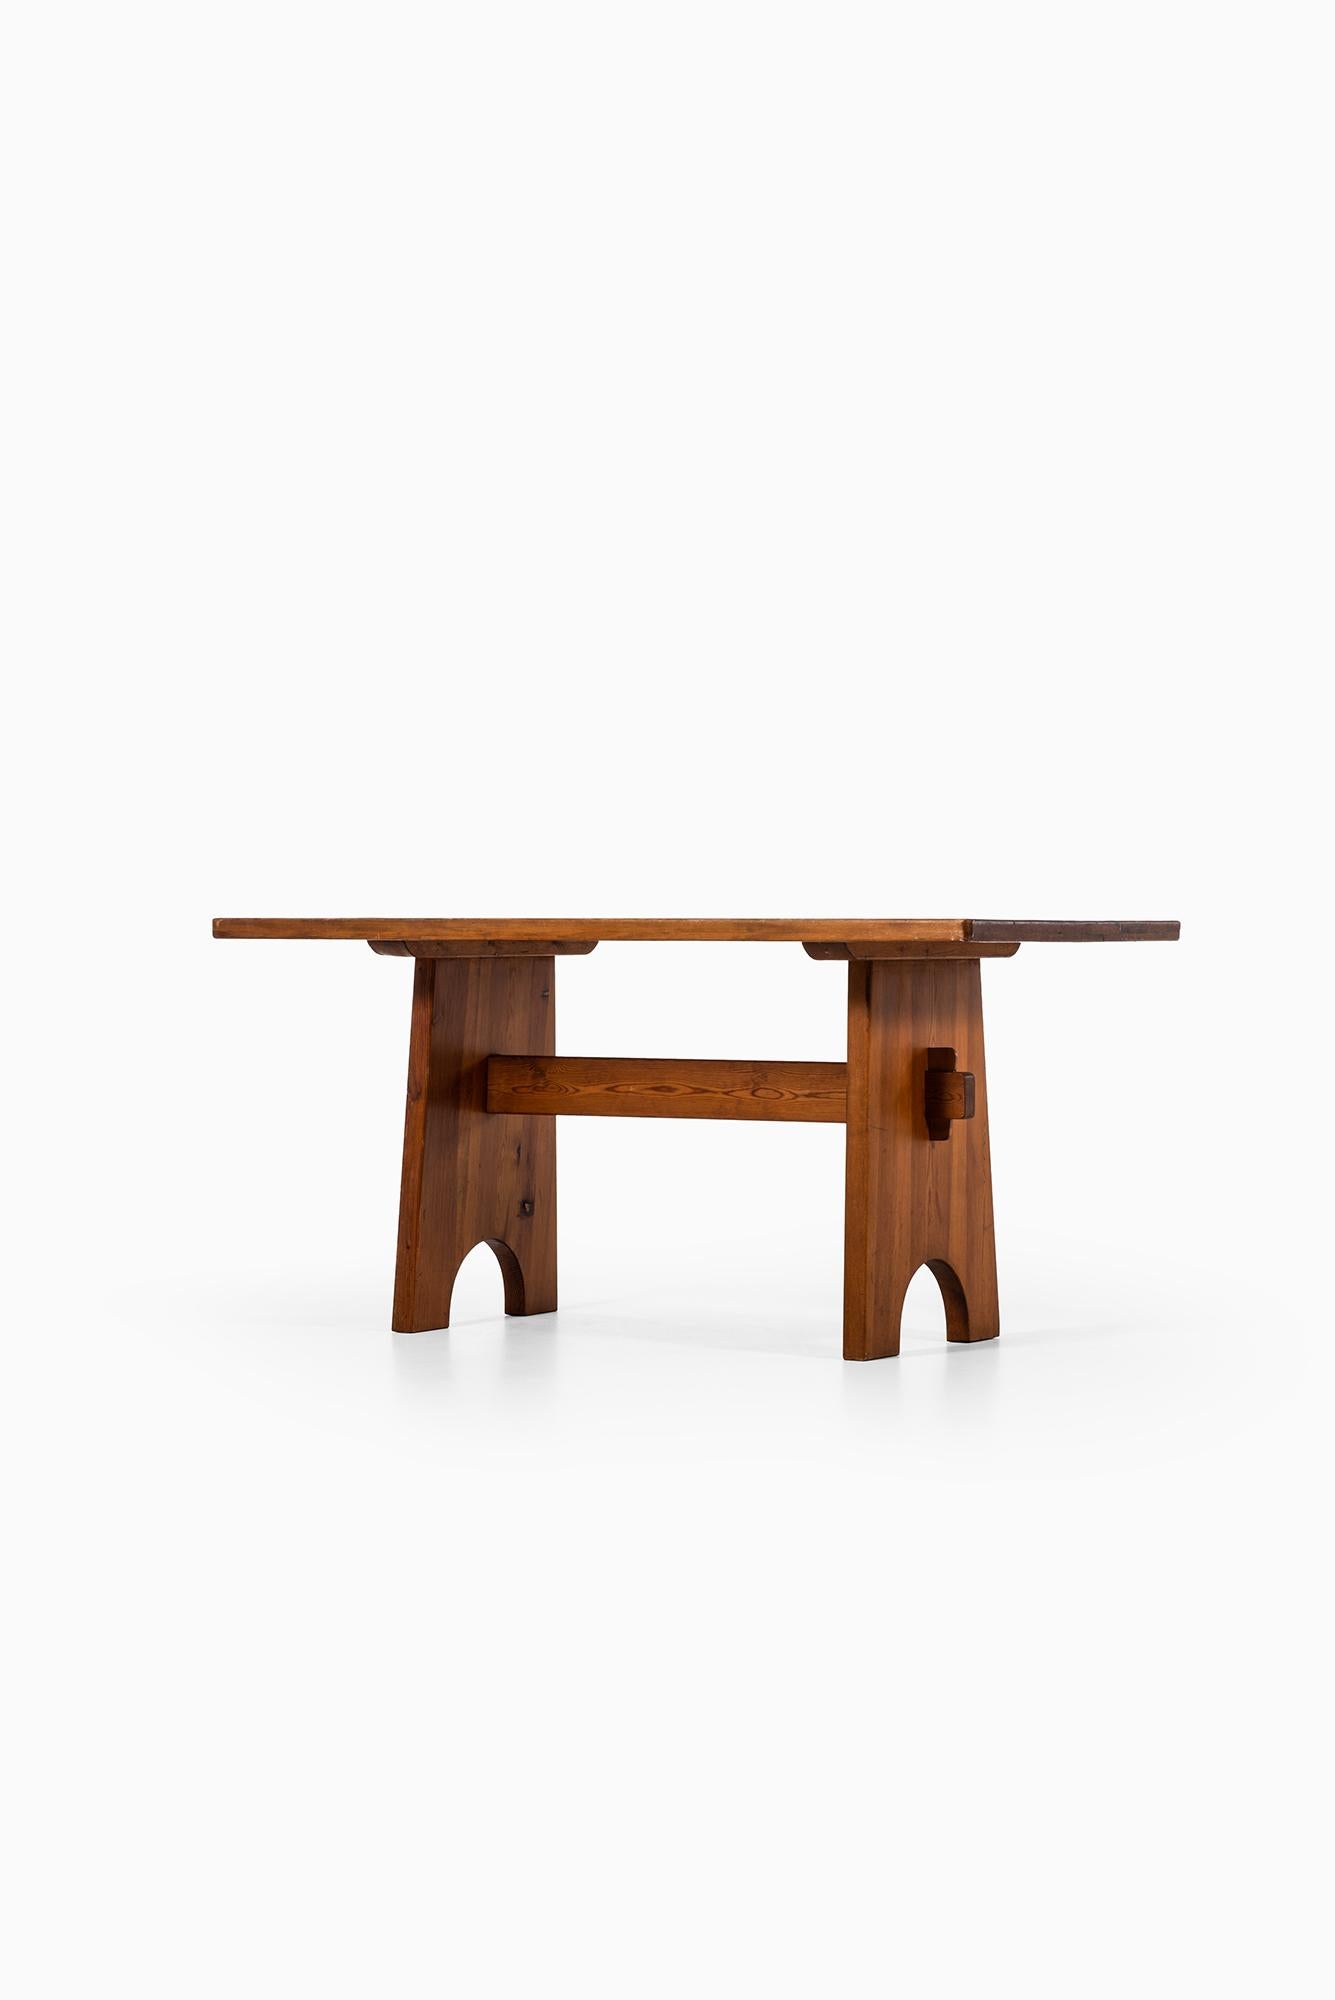 Axel Einar Hjorth Attributed Dining Table in Pine Produced in Sweden 1